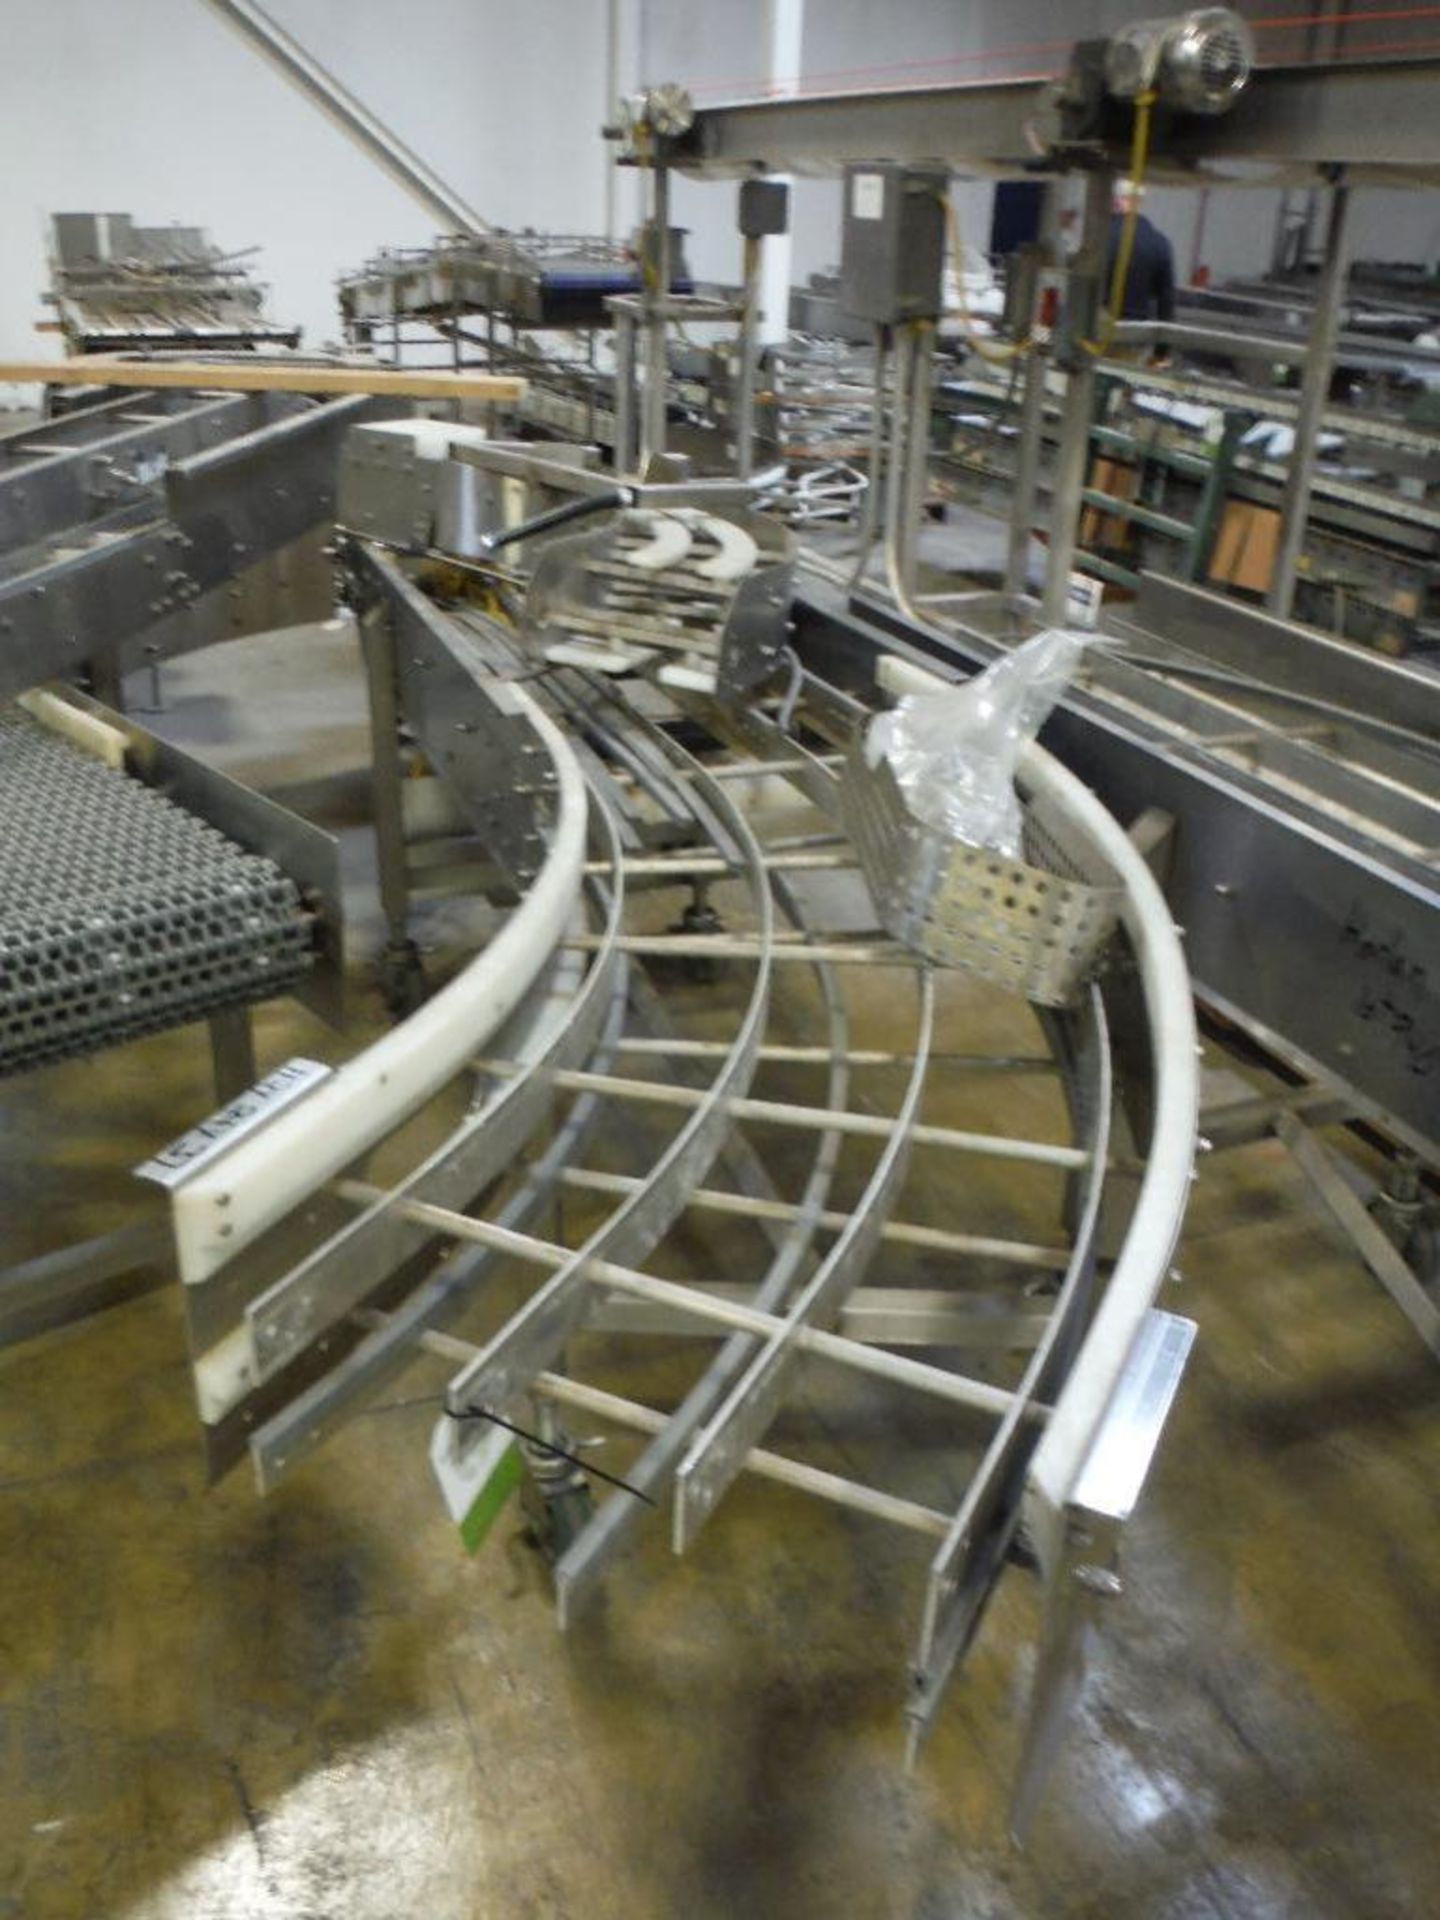 2 pieces of SS conveyor frame, 90 degree turn, motor and drive, missing belt, overall 260 in. long x - Image 2 of 6